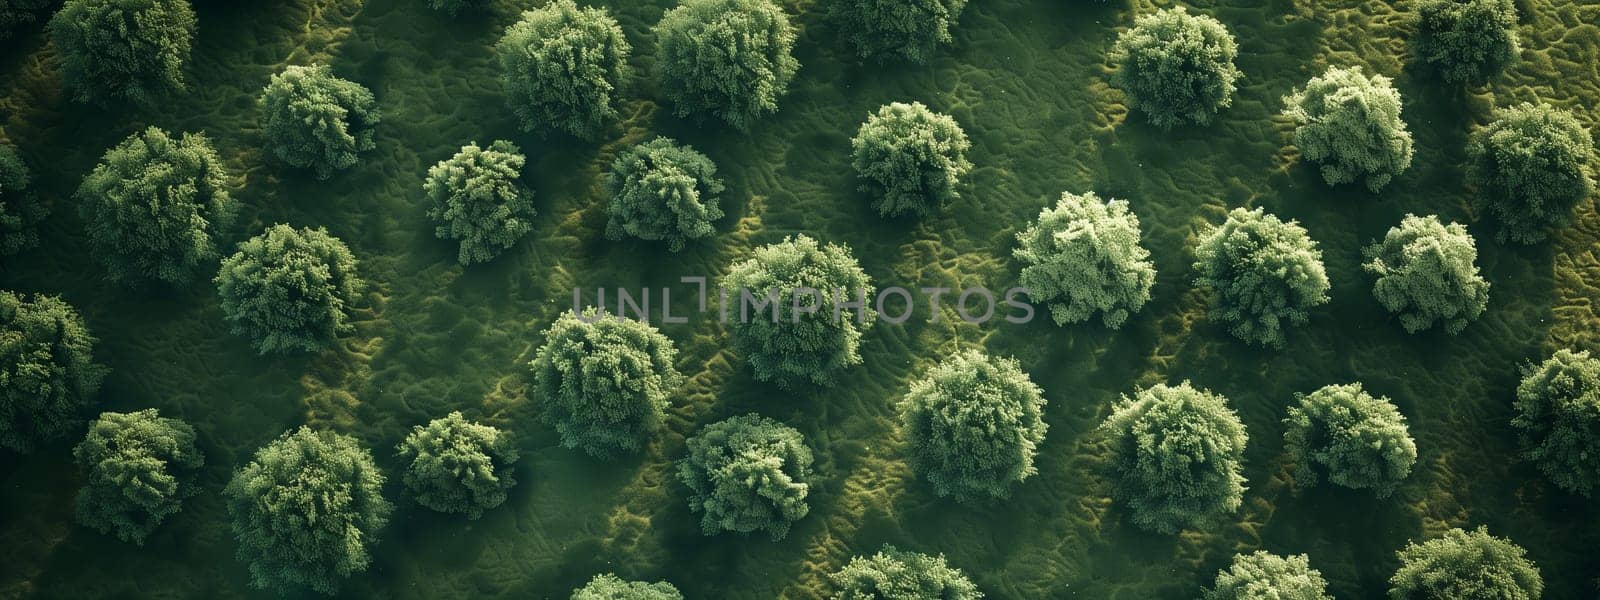 Terrestrial plants create a lush pattern in the forest from an aerial view by richwolf